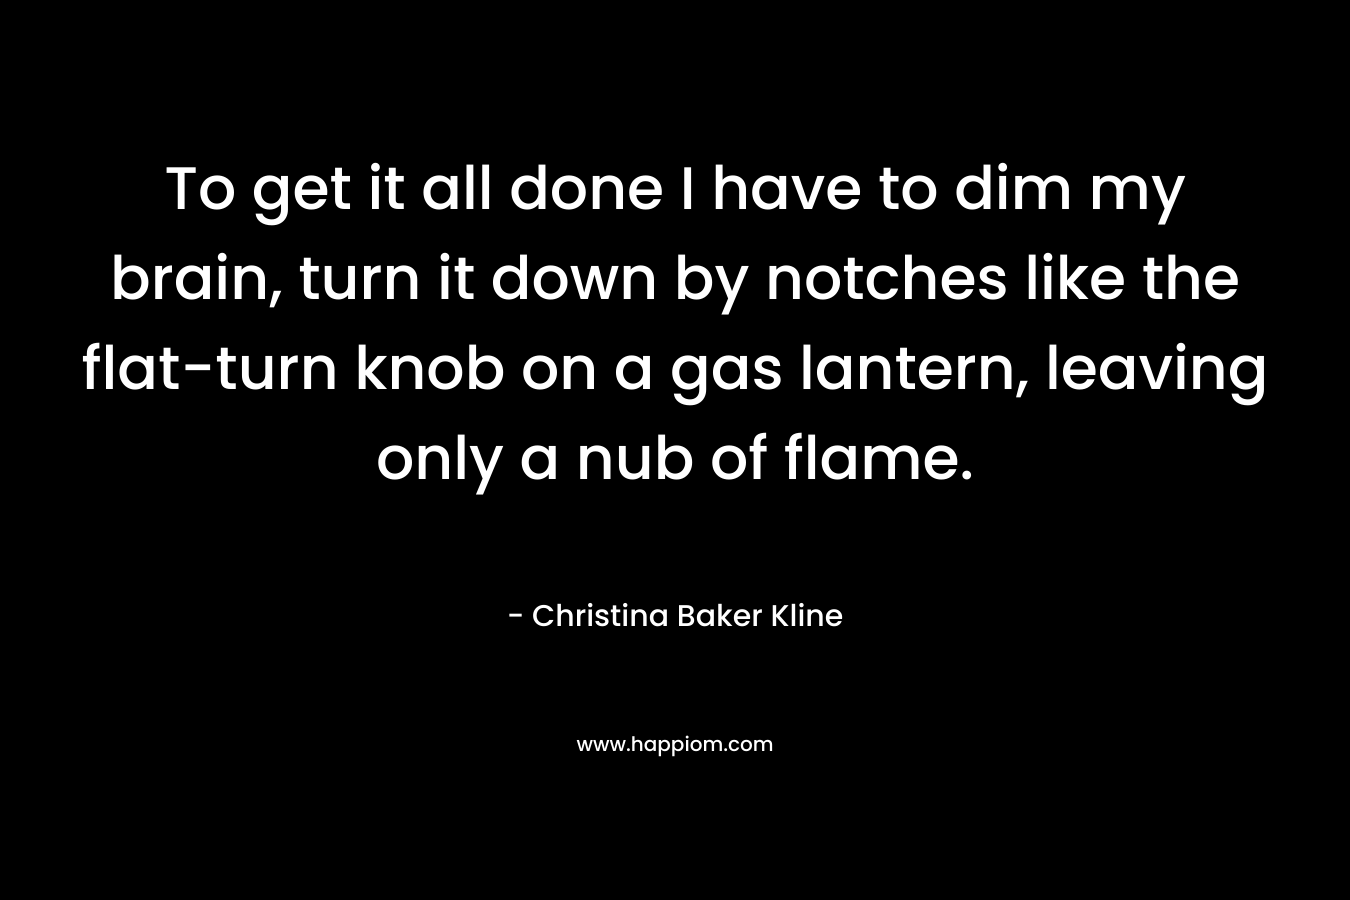 To get it all done I have to dim my brain, turn it down by notches like the flat-turn knob on a gas lantern, leaving only a nub of flame. – Christina Baker Kline